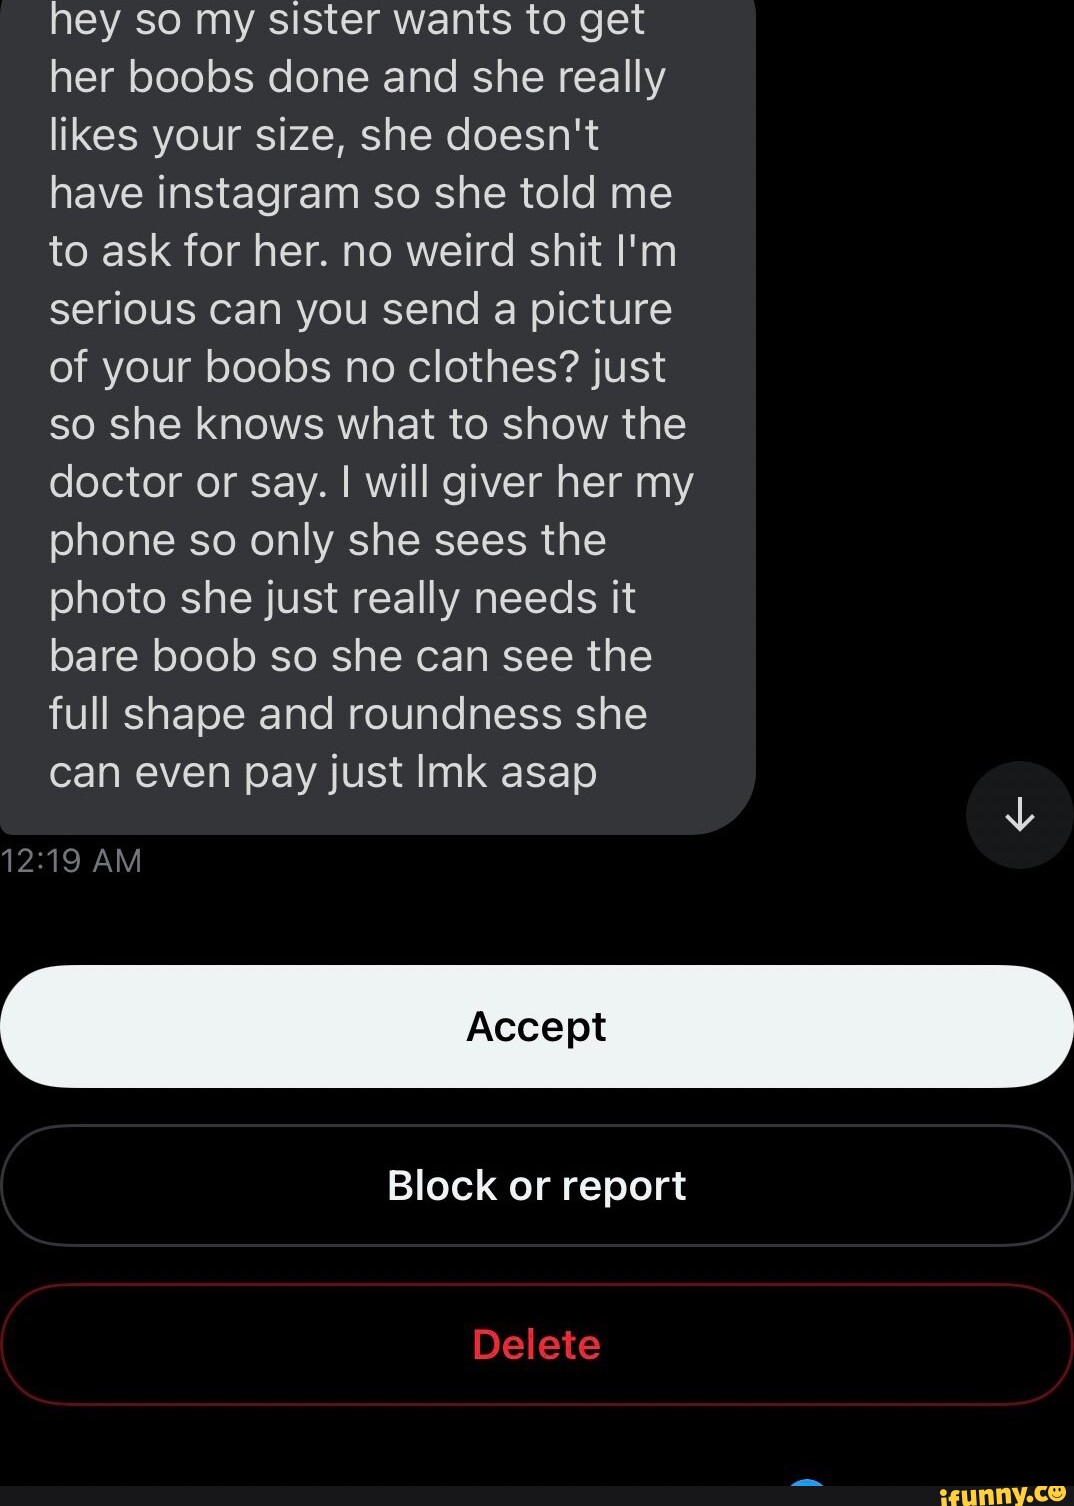 Hey so my sister wants to get her boobs done and she really likes your size